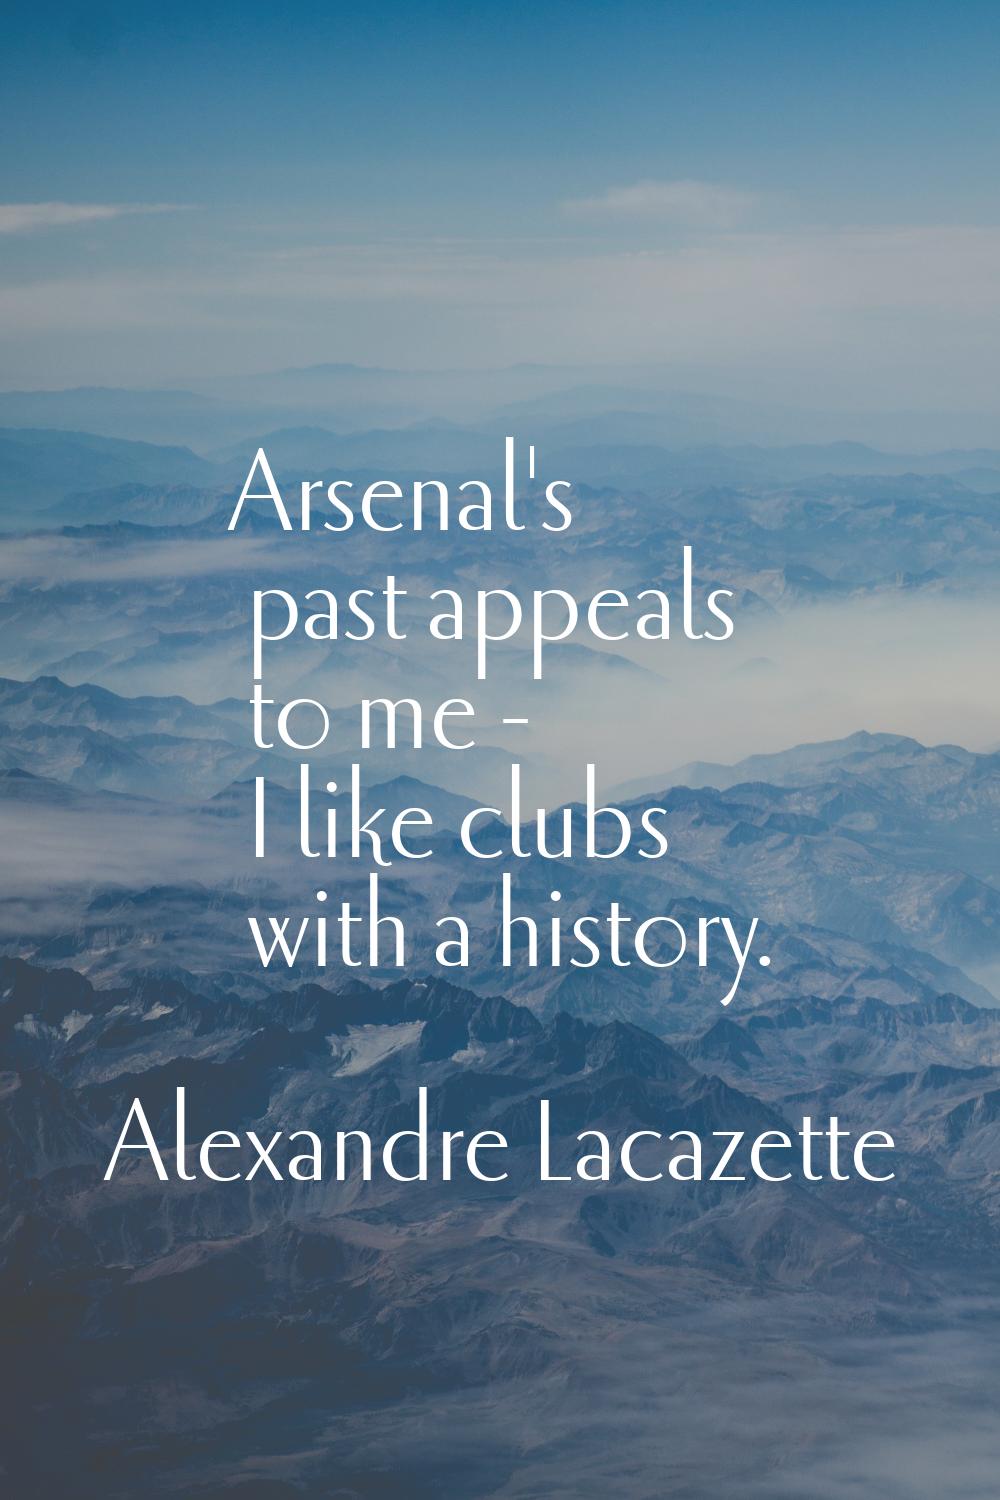 Arsenal's past appeals to me - I like clubs with a history.